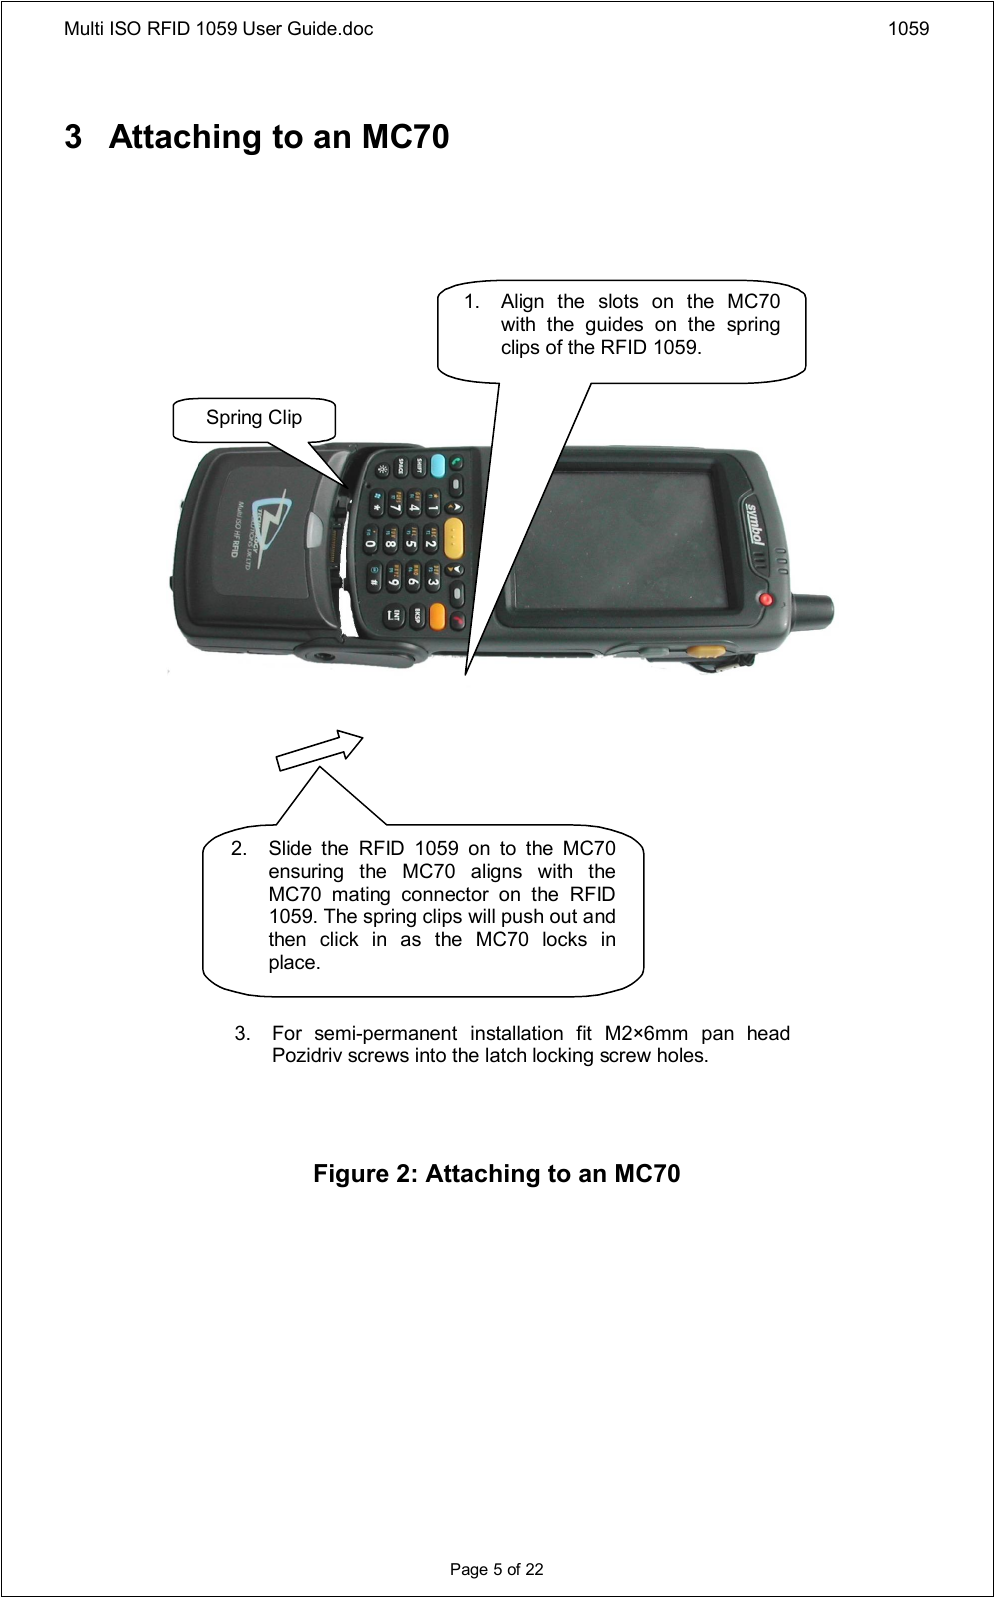 Multi ISO RFID 1059 User Guide.doc 1059Page 5 of 223 Attaching to an MC70Figure 2: Attaching to an MC70Spring Clip3. For  semi-permanent  installation  fit  M2×6mm  pan  head Pozidriv screws into the latch locking screw holes.1.Align  the  slots  on  the  MC70 with  the  guides  on  the  spring clips of the RFID 1059.2. Slide  the  RFID  1059  on  to  the  MC70 ensuring  the  MC70  aligns  with  the MC70  mating  connector  on  the  RFID 1059. The spring clips will push out and then  click  in  as  the  MC70  locks  in place.